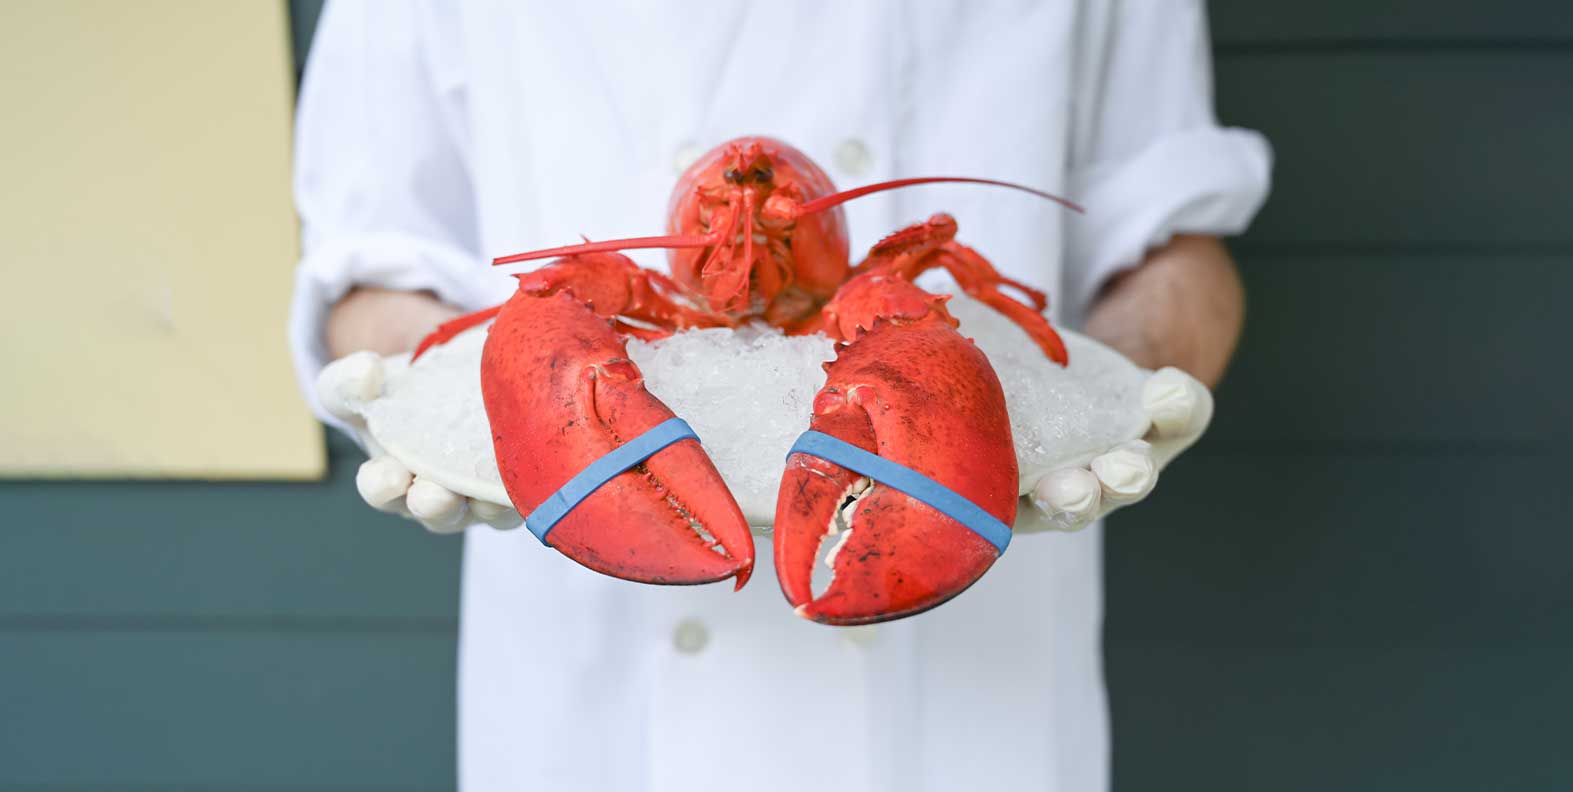 Lobster with banded claws presented on a plate of ice